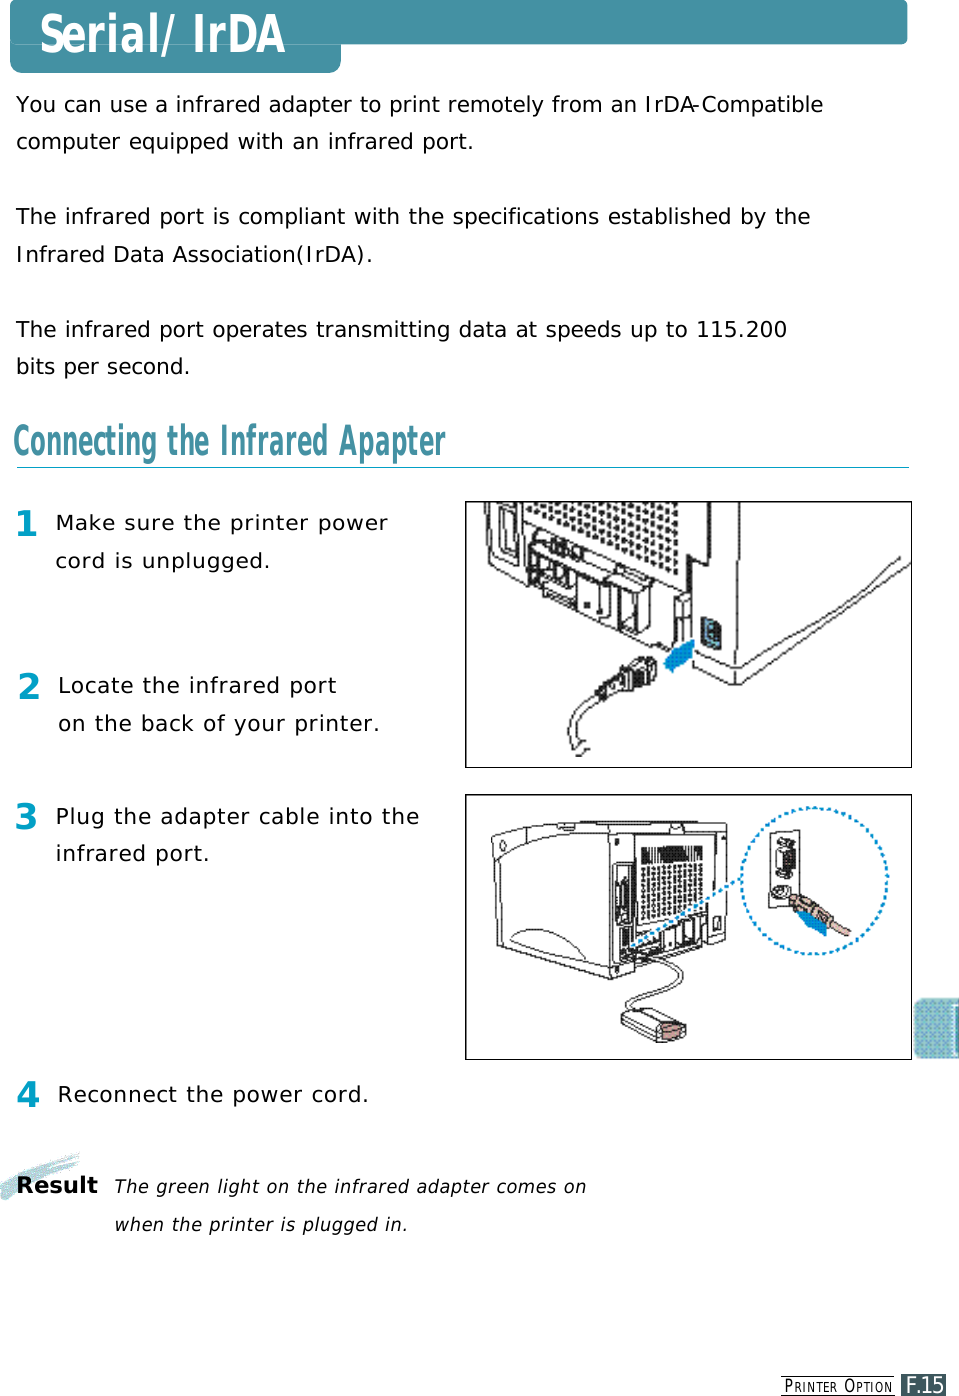 PR I N T E R OP T I O NF.15You can use a infrared adapter to print remotely from an IrDA- C o m p a t i b l ecomputer equipped with an infrared port.The infrared port is compliant with the specifications established by theInfrared Data Association(IrDA).The infrared port operates transmitting data at speeds up to 115.200bits per second.1M a ke sure the printer powercord is unplugged.2Locate the infrared port on the back of your printer.3Plug the adapter cable into thei n f rared port.4Reconnect the power cord.Result  The green light on the infrared adapter comes on when the printer is plugged in.Serial/IrDAConnecting the Infrared Apapter